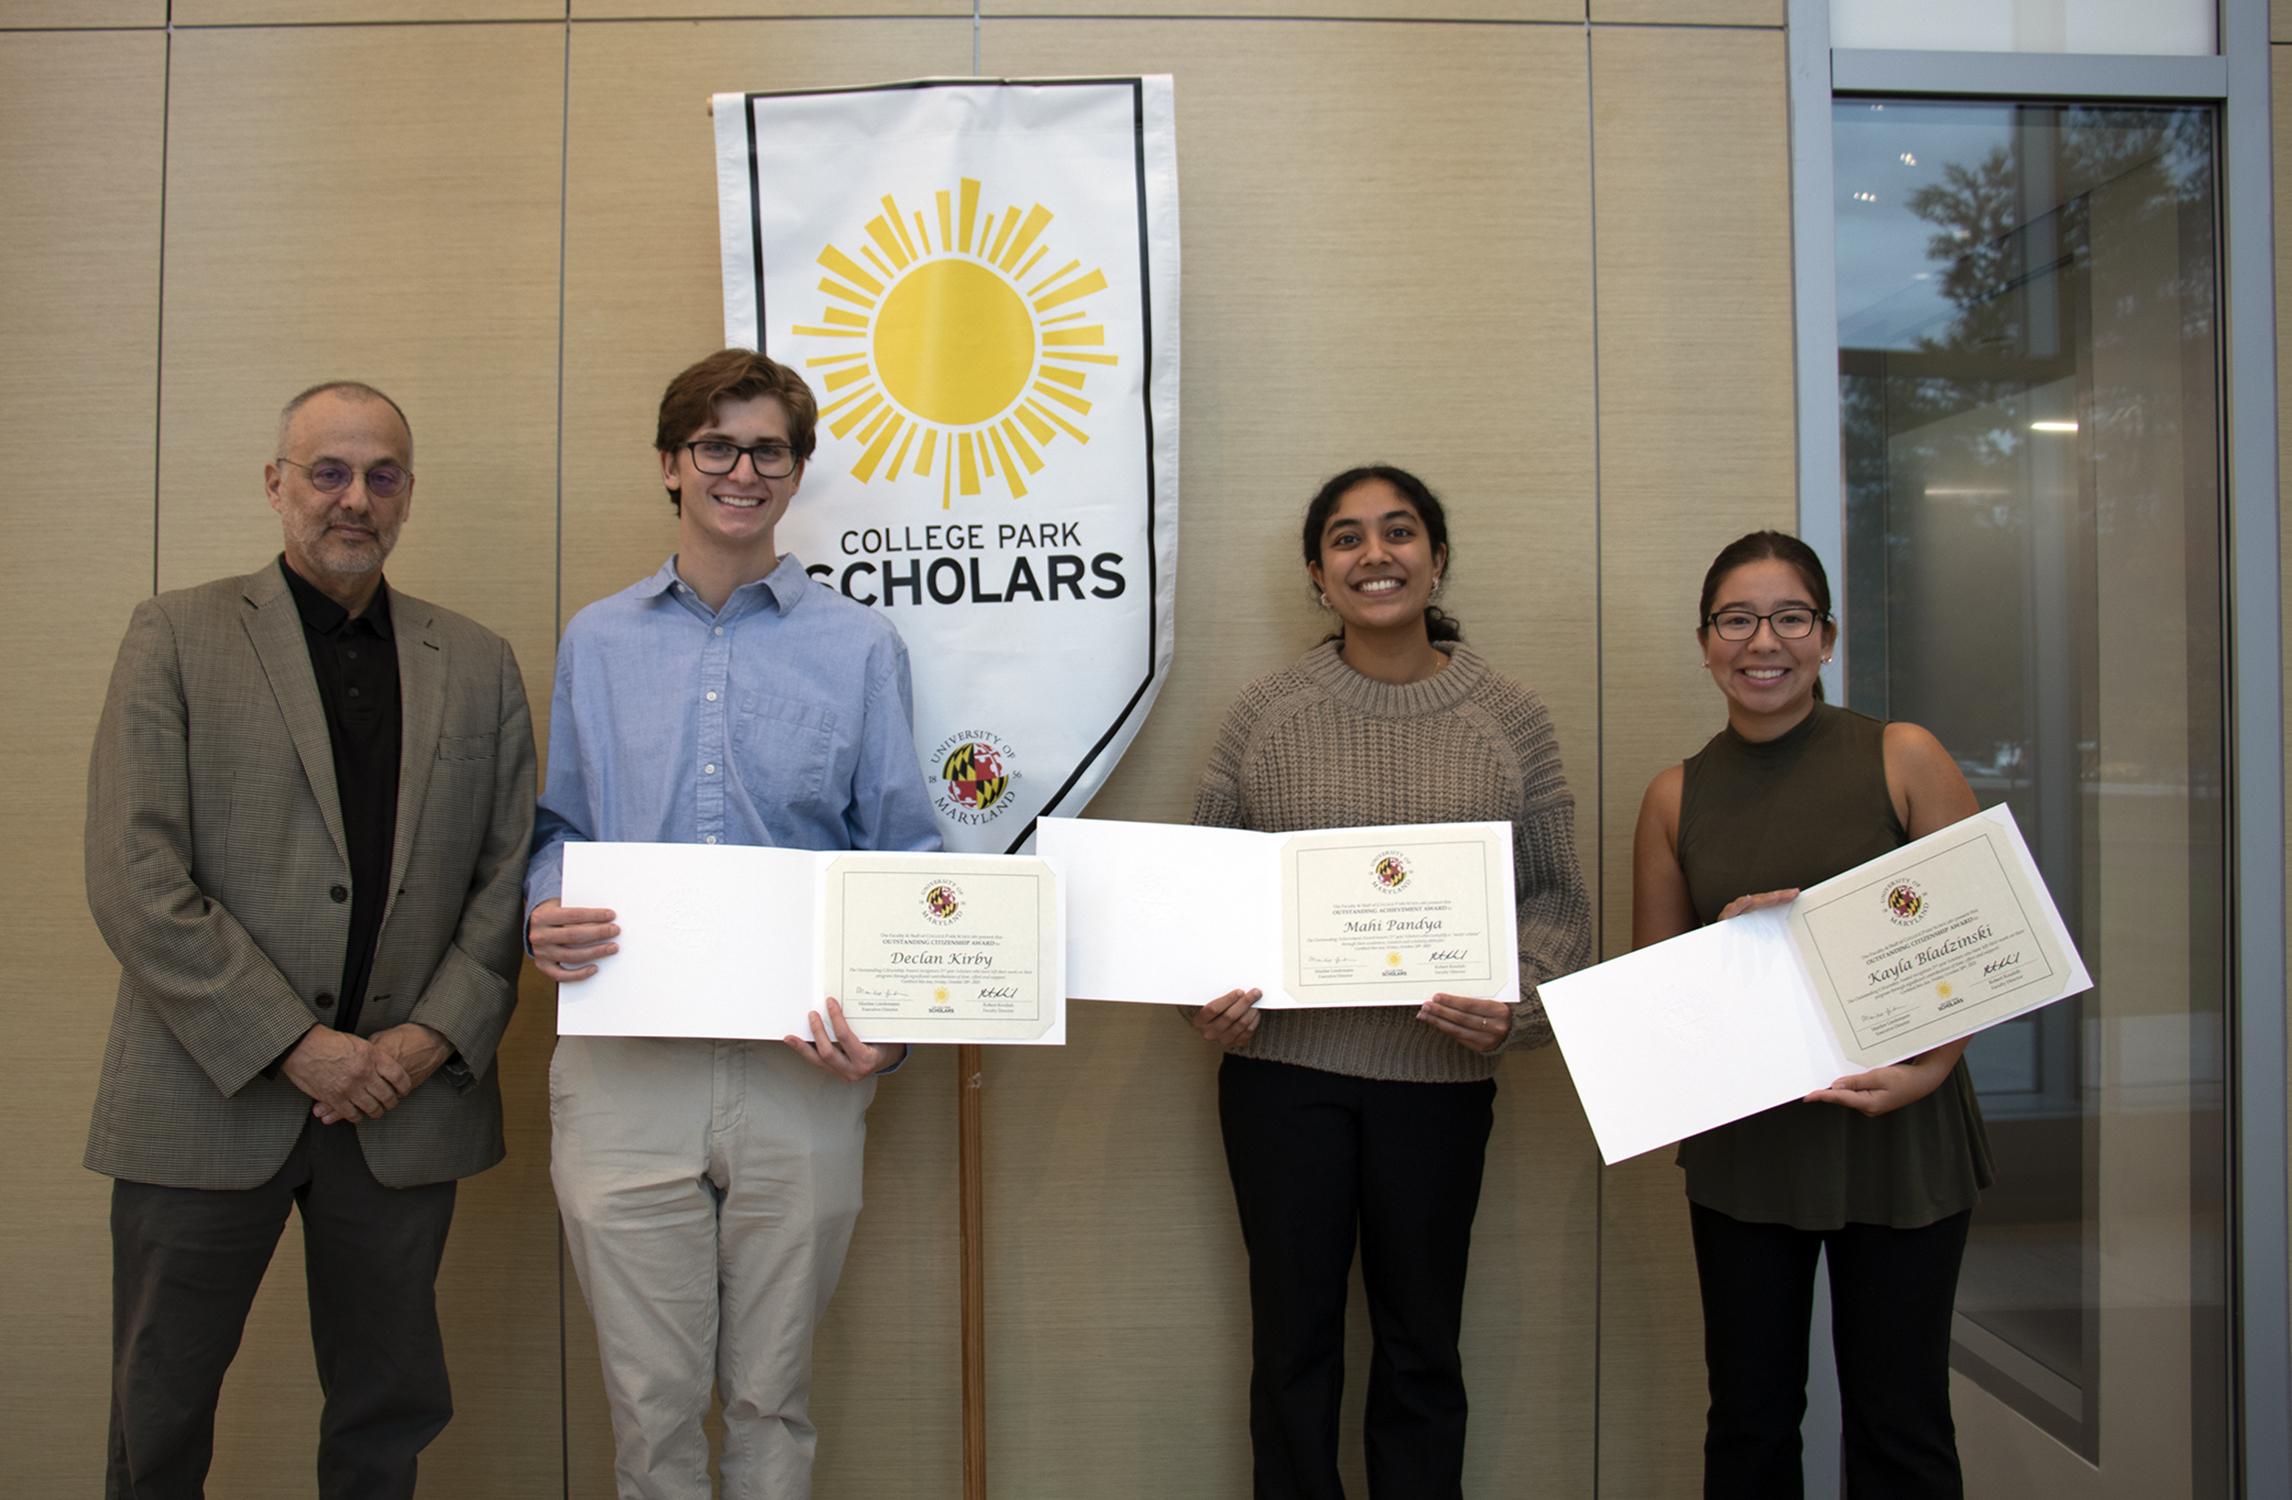 Justice and Legal Thought winners with certificates 